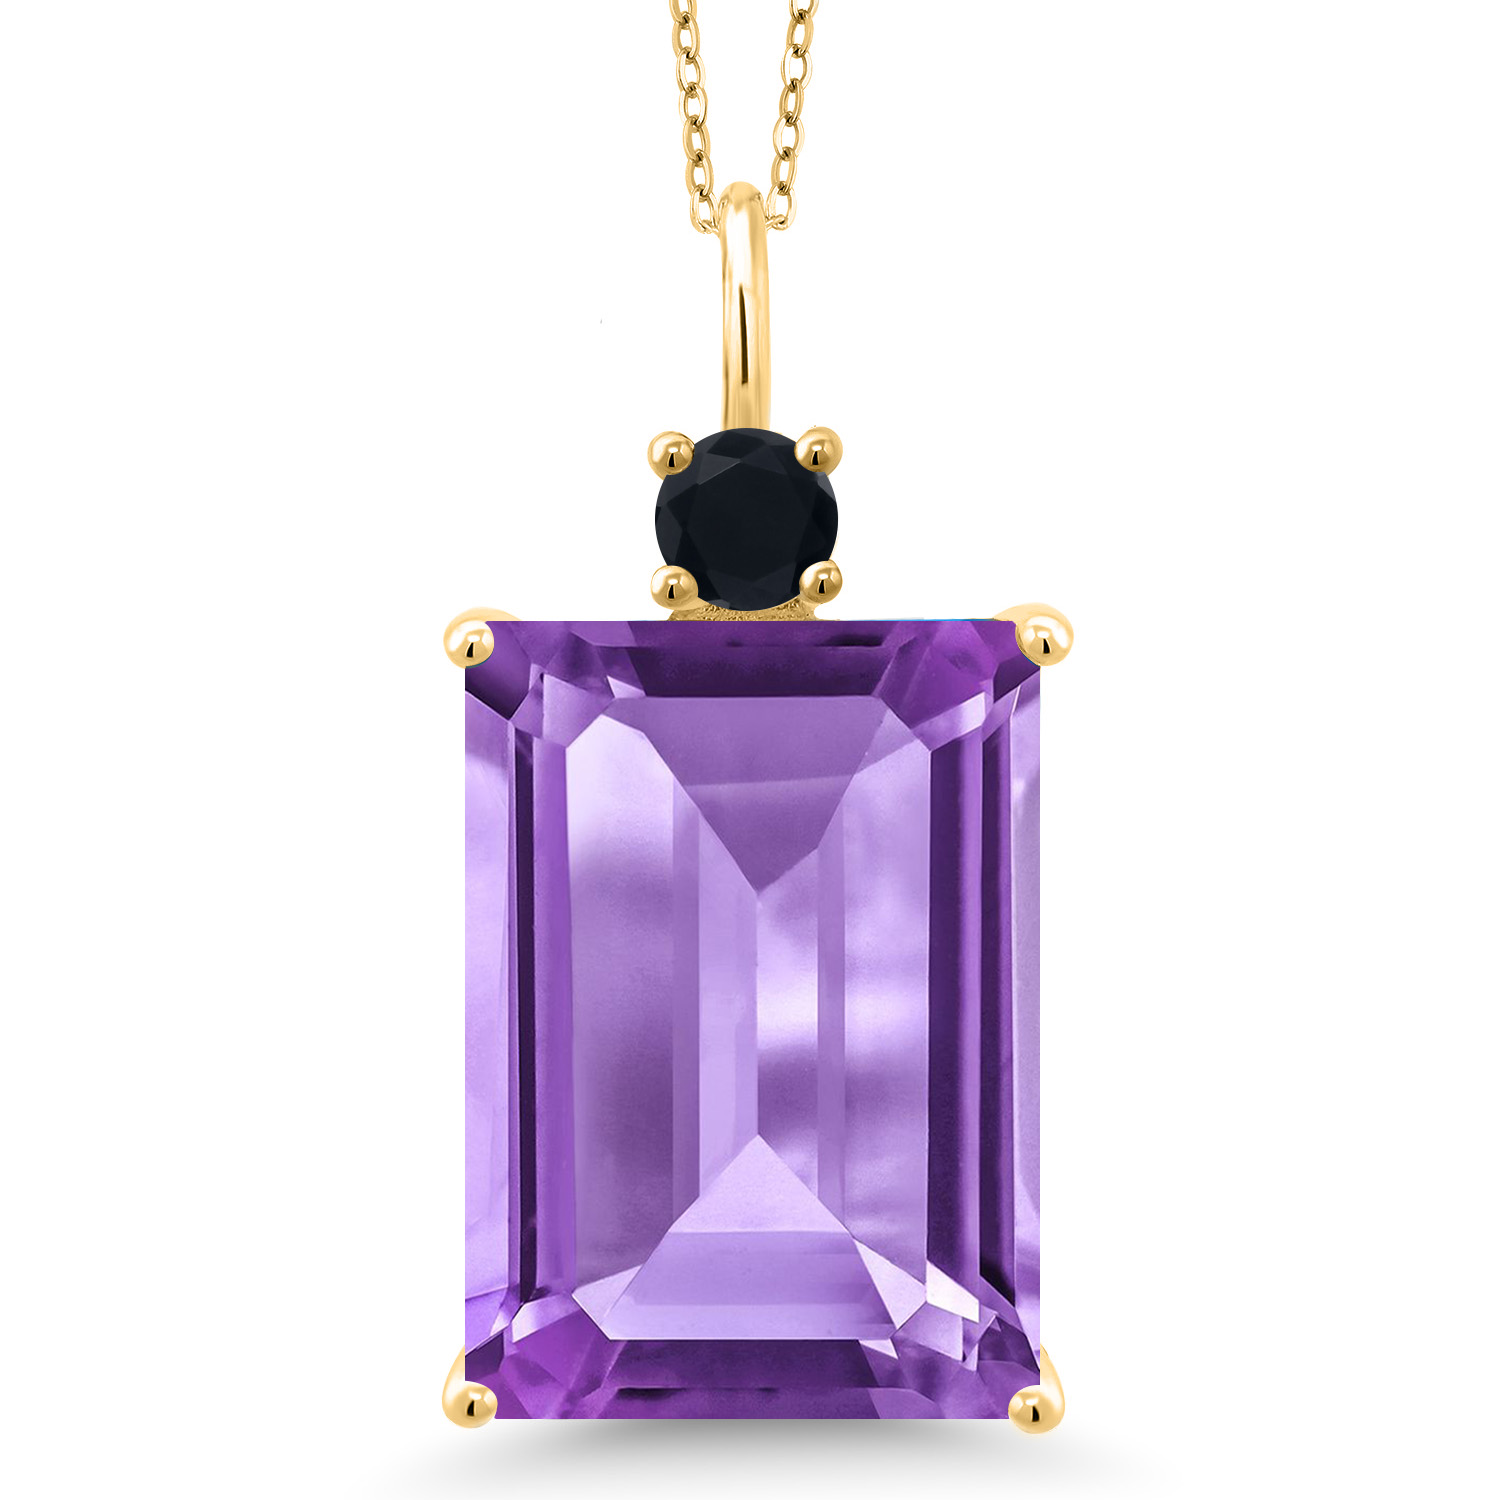 Gem Stone King 15.22 Ct Purple Amethyst Black Onyx 18K Yellow Gold Plated Silver Pendant with Chain